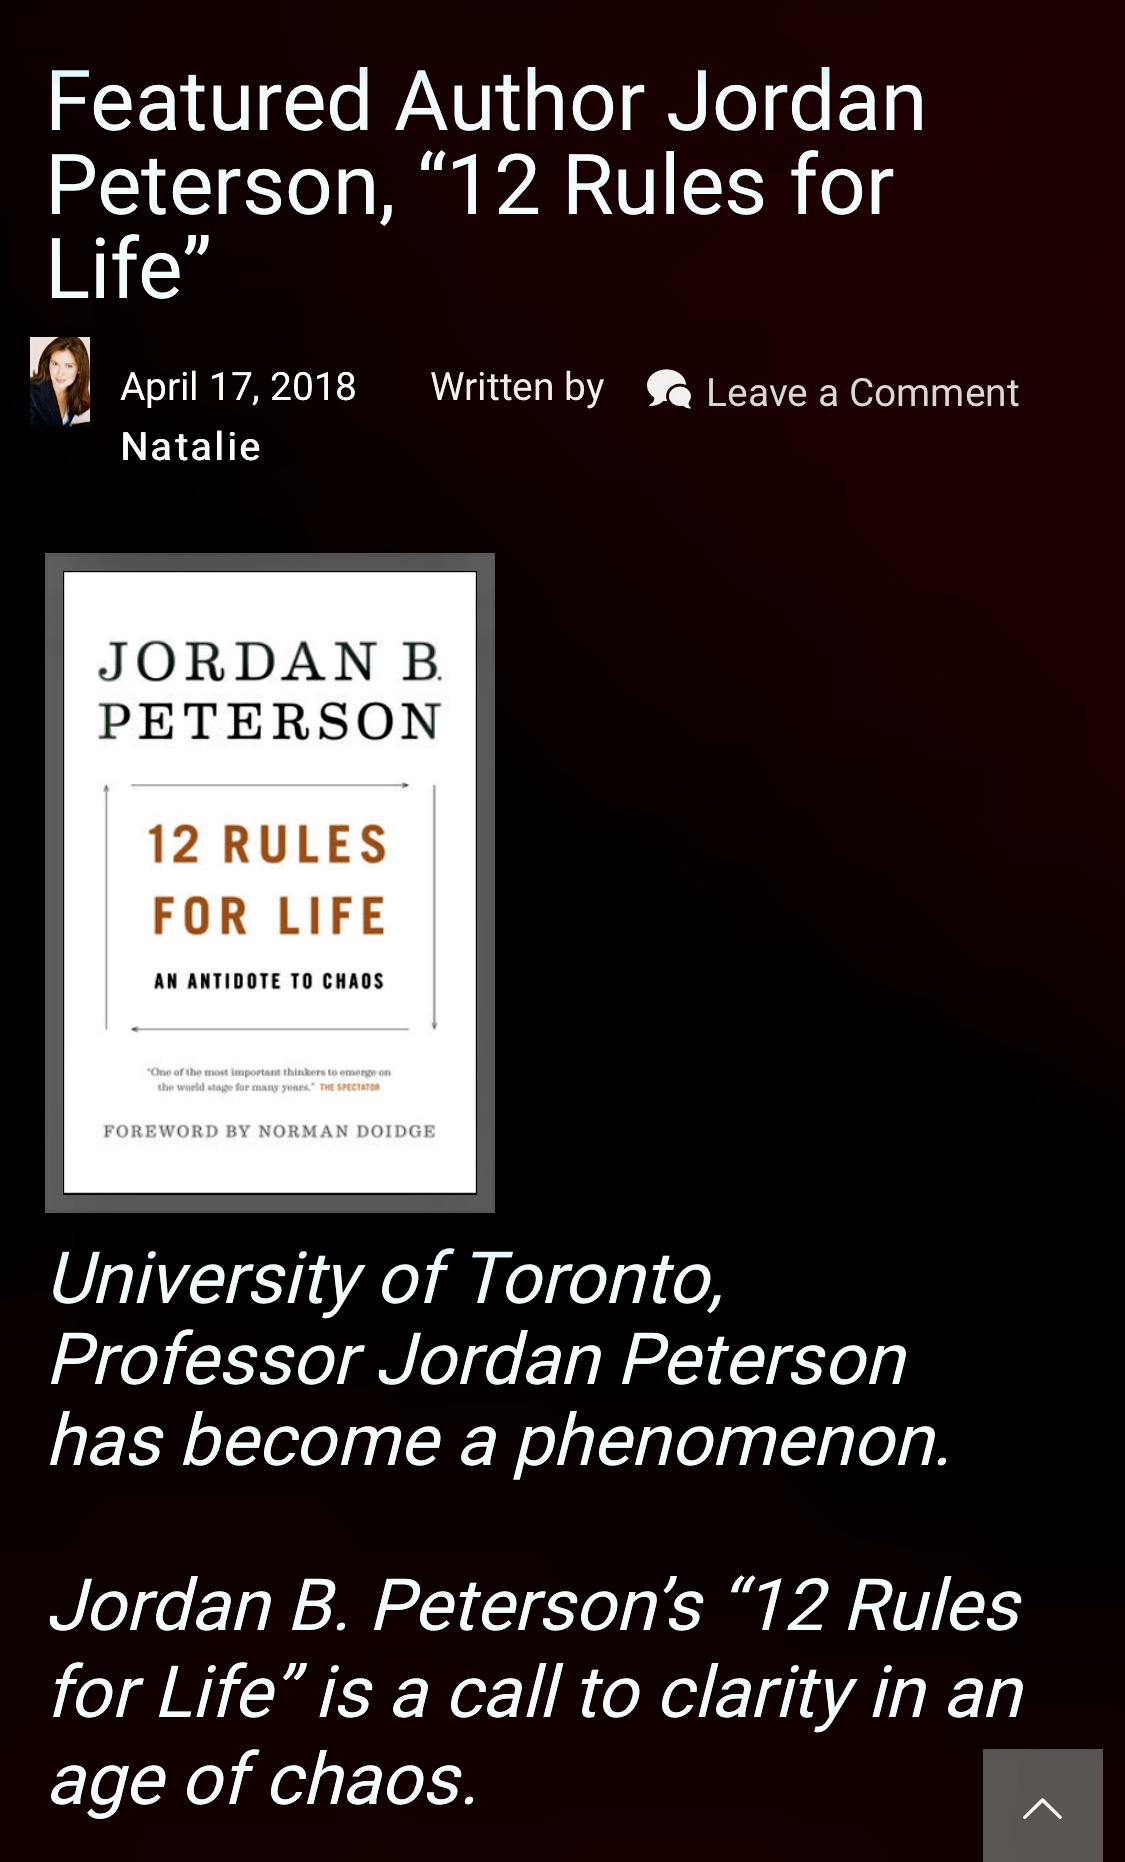 Featured Author Jordan B. Peterson “12 Rules for Life: An Antidote to Chaos”